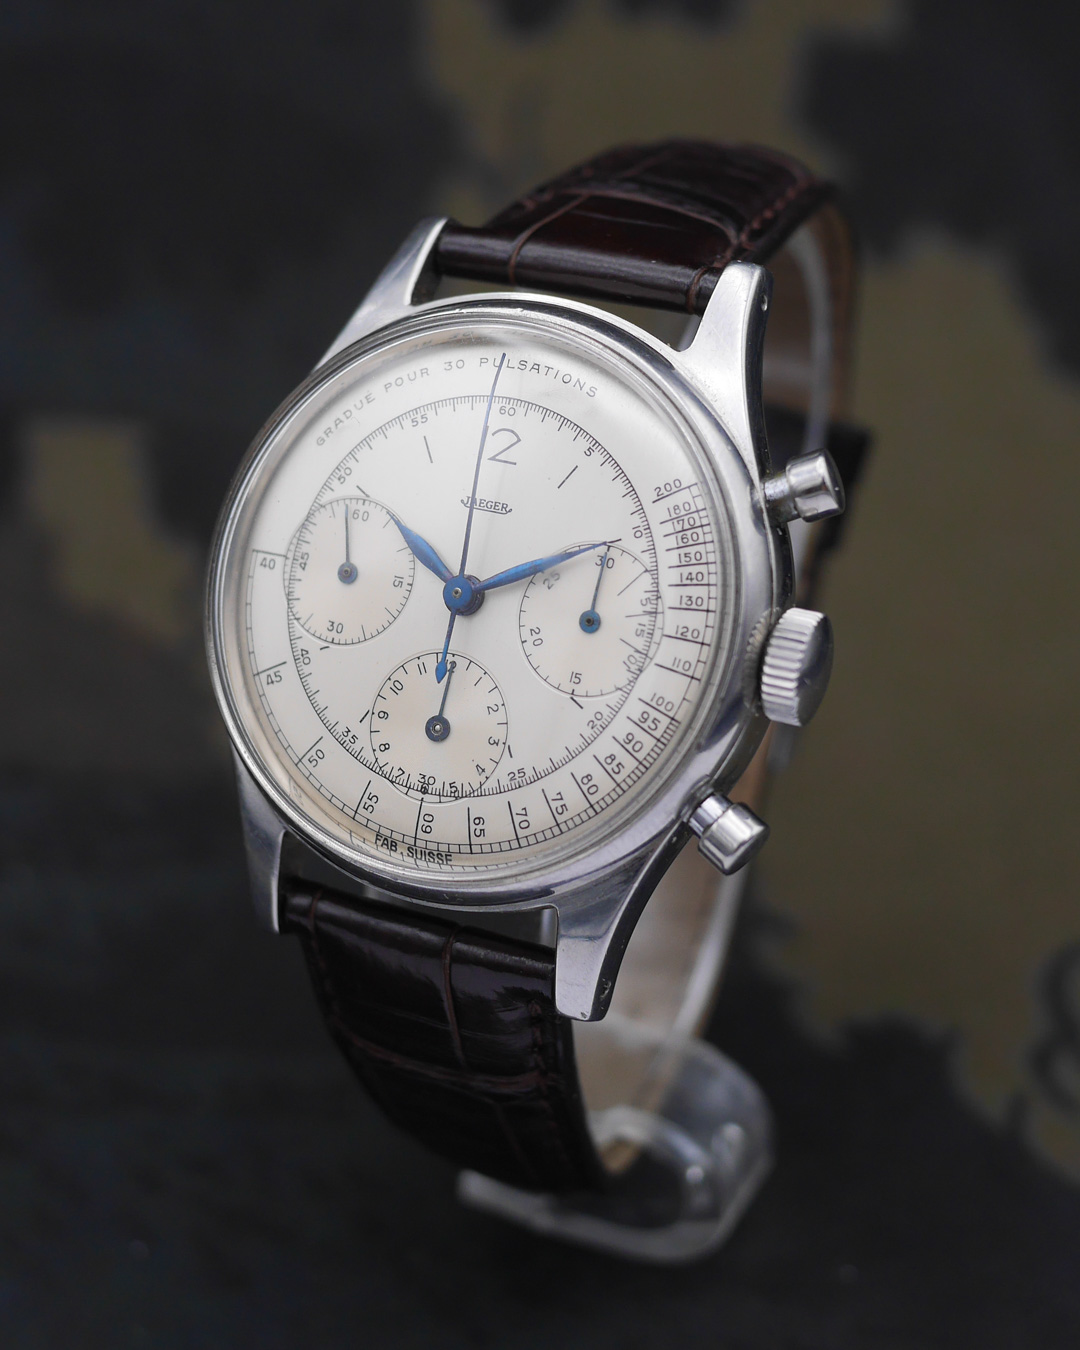 1950s Jaeger pulsometer oversized chronograph ref. 224105 - Sabiwatches